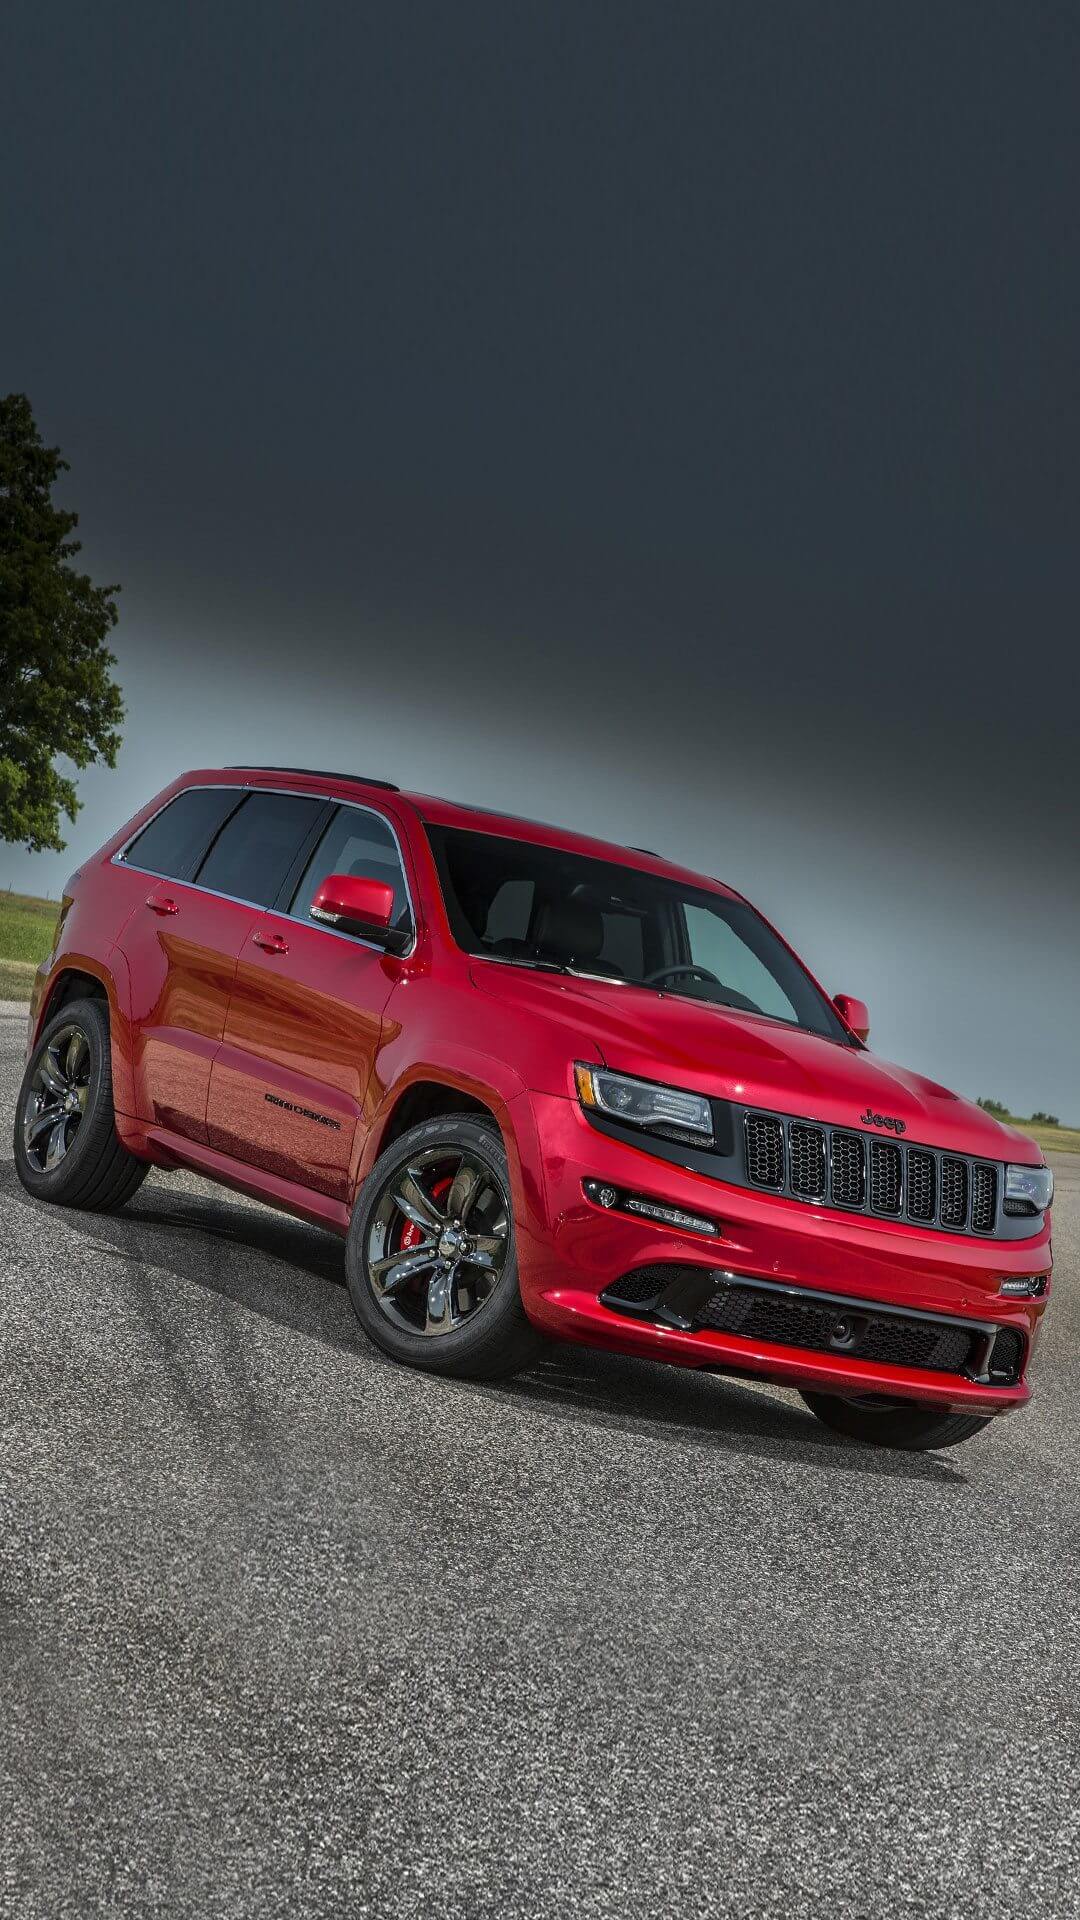 Jeep Grand Cherokee Wallpaper For iPhone 6 Wallpaper iPhone